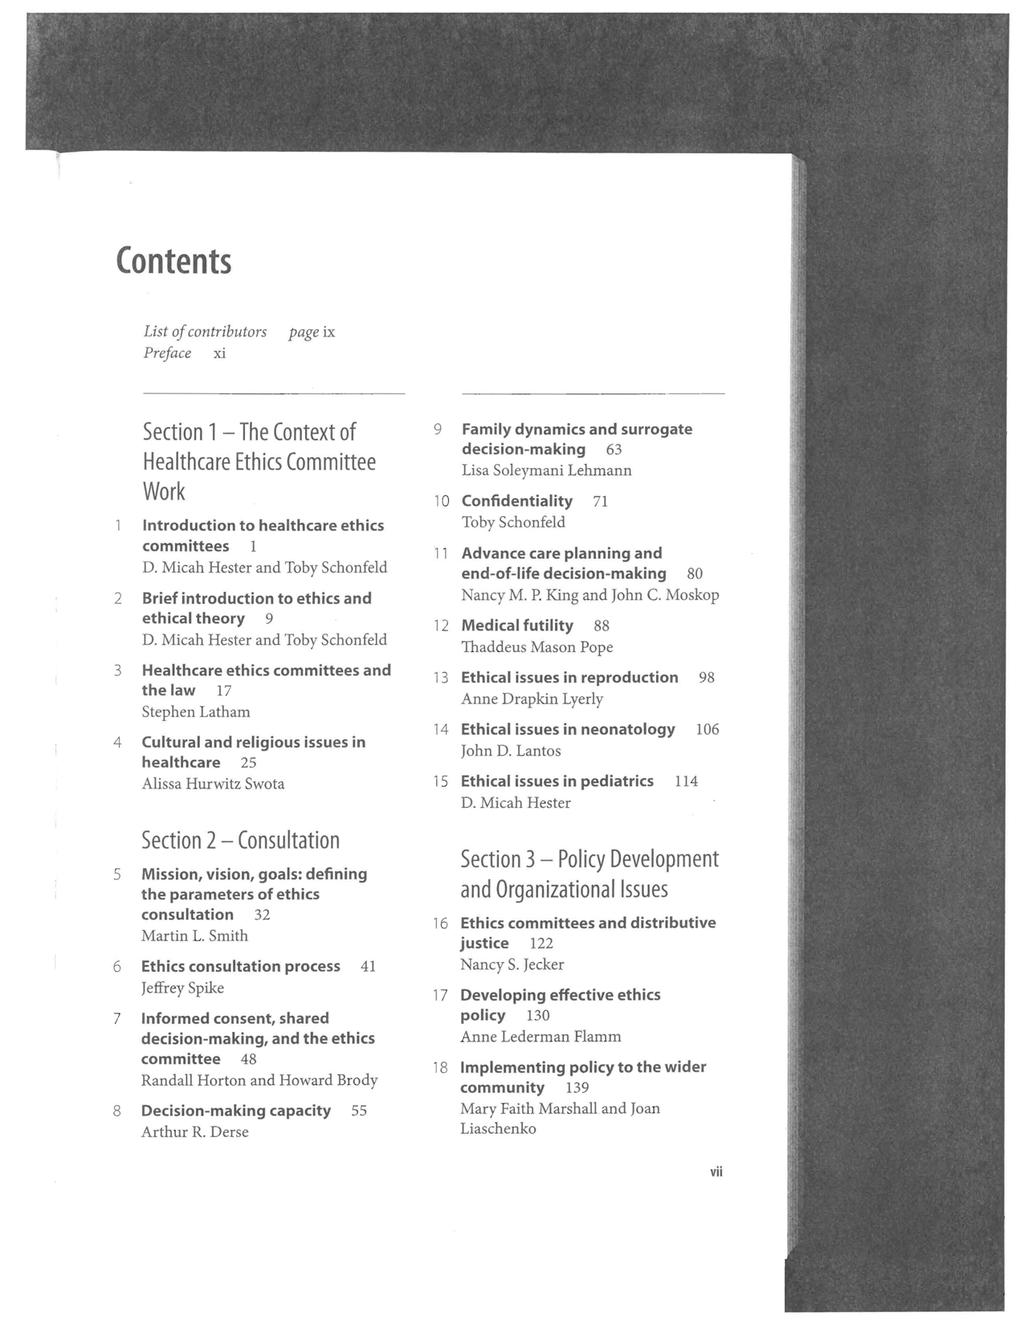 Contents List ofcontributors Preface xi page ix Section 1 - The Context of Healthcare Ethics Committee Work Introduction to healthcare ethics committees 1 D.